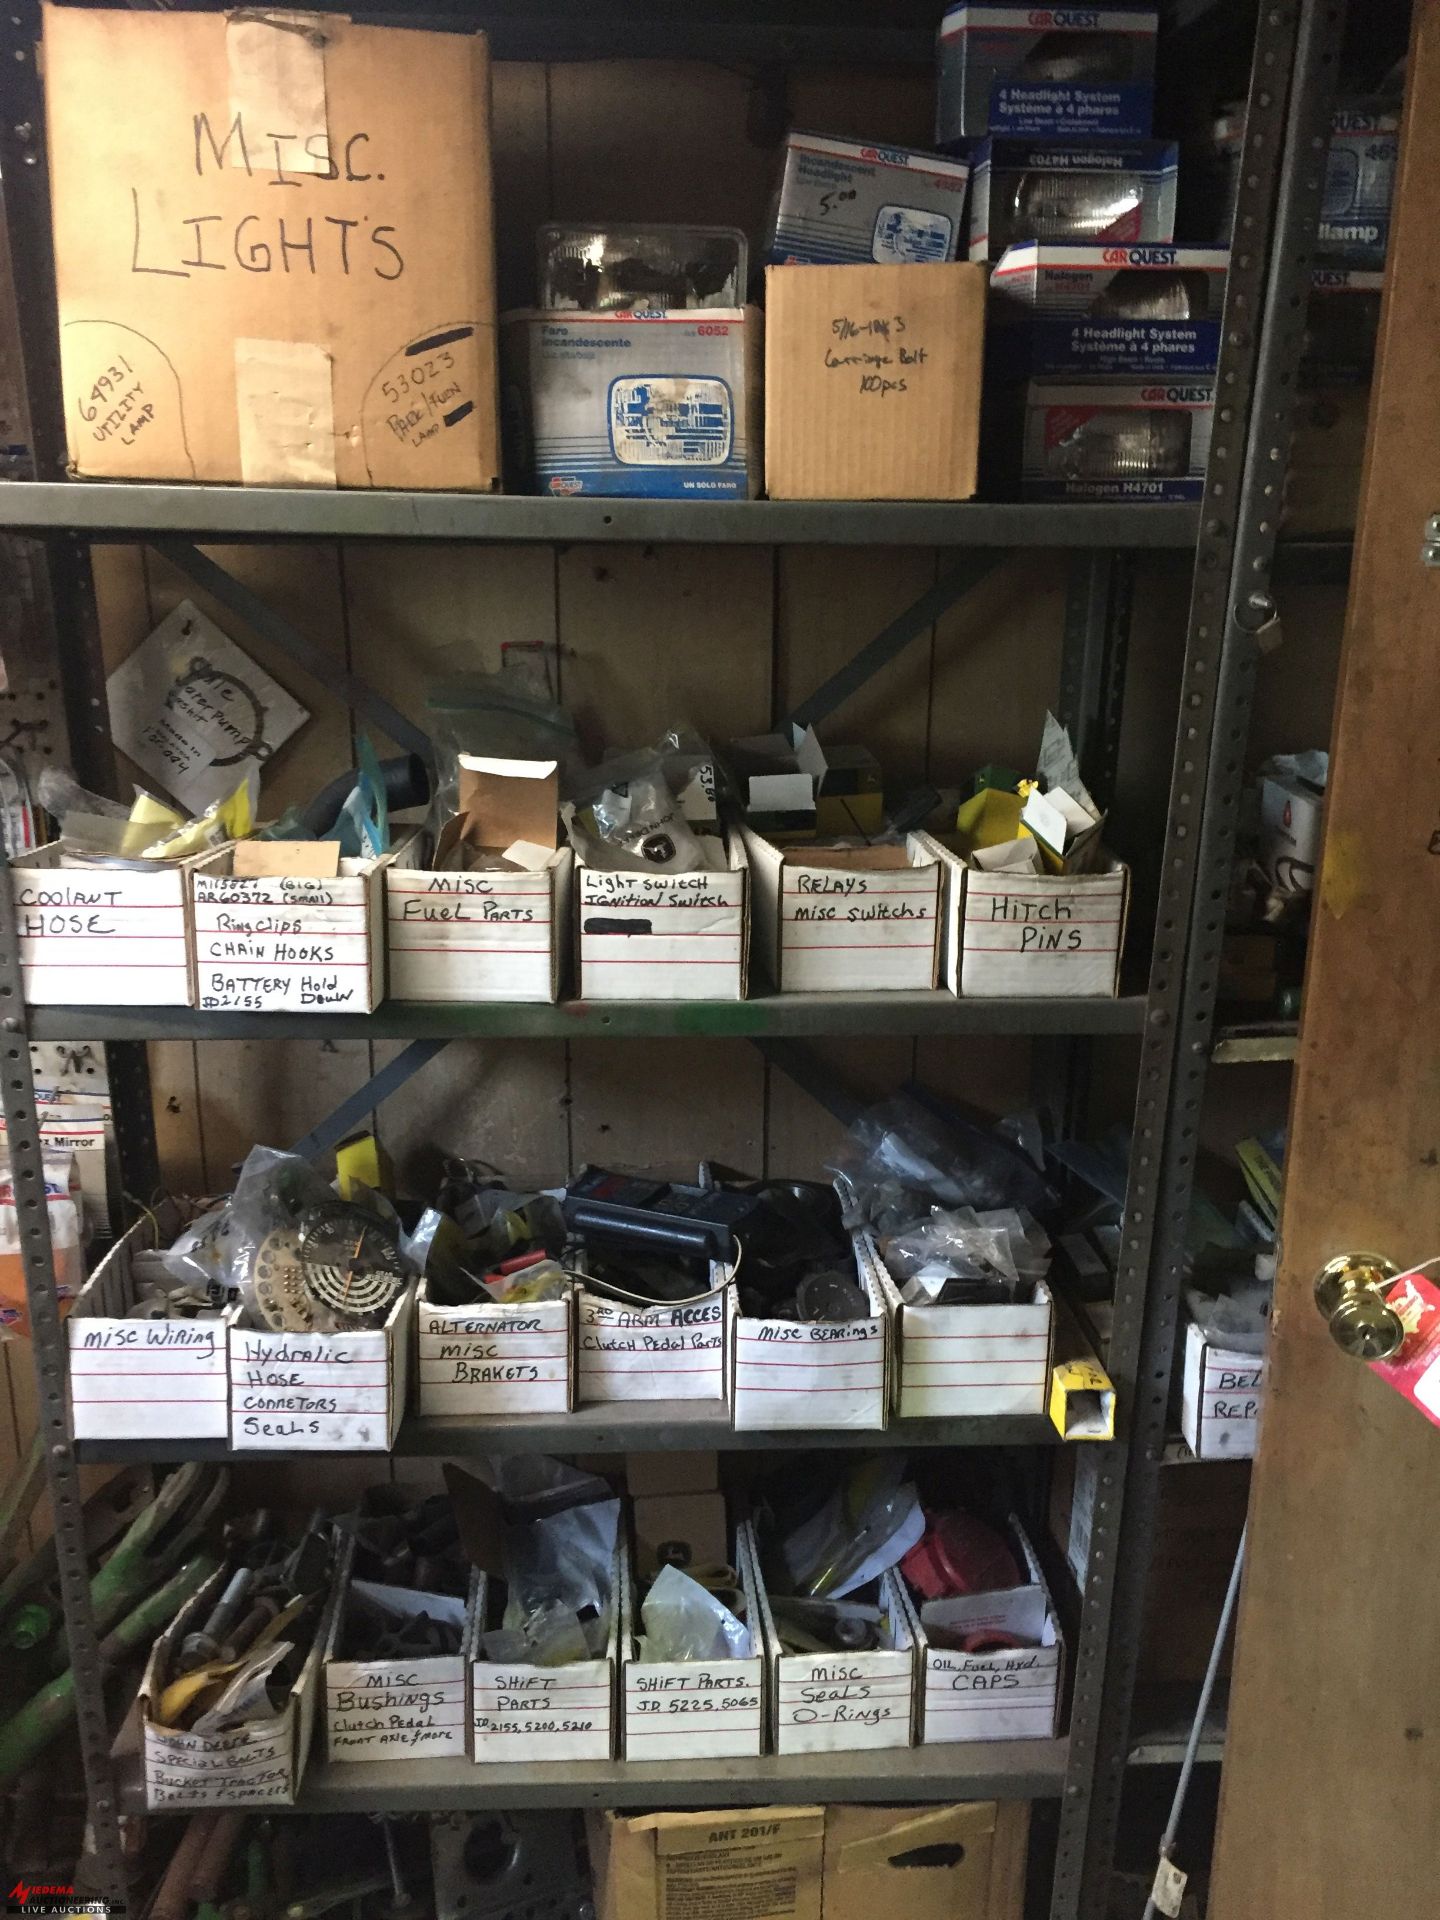 ASSORTED PARTS, METAL CABINETS, FILTERS, GASKETS, LIGHTS AND MORE [LOCATION: SOUTH SHOP AT MAIN - Image 2 of 3